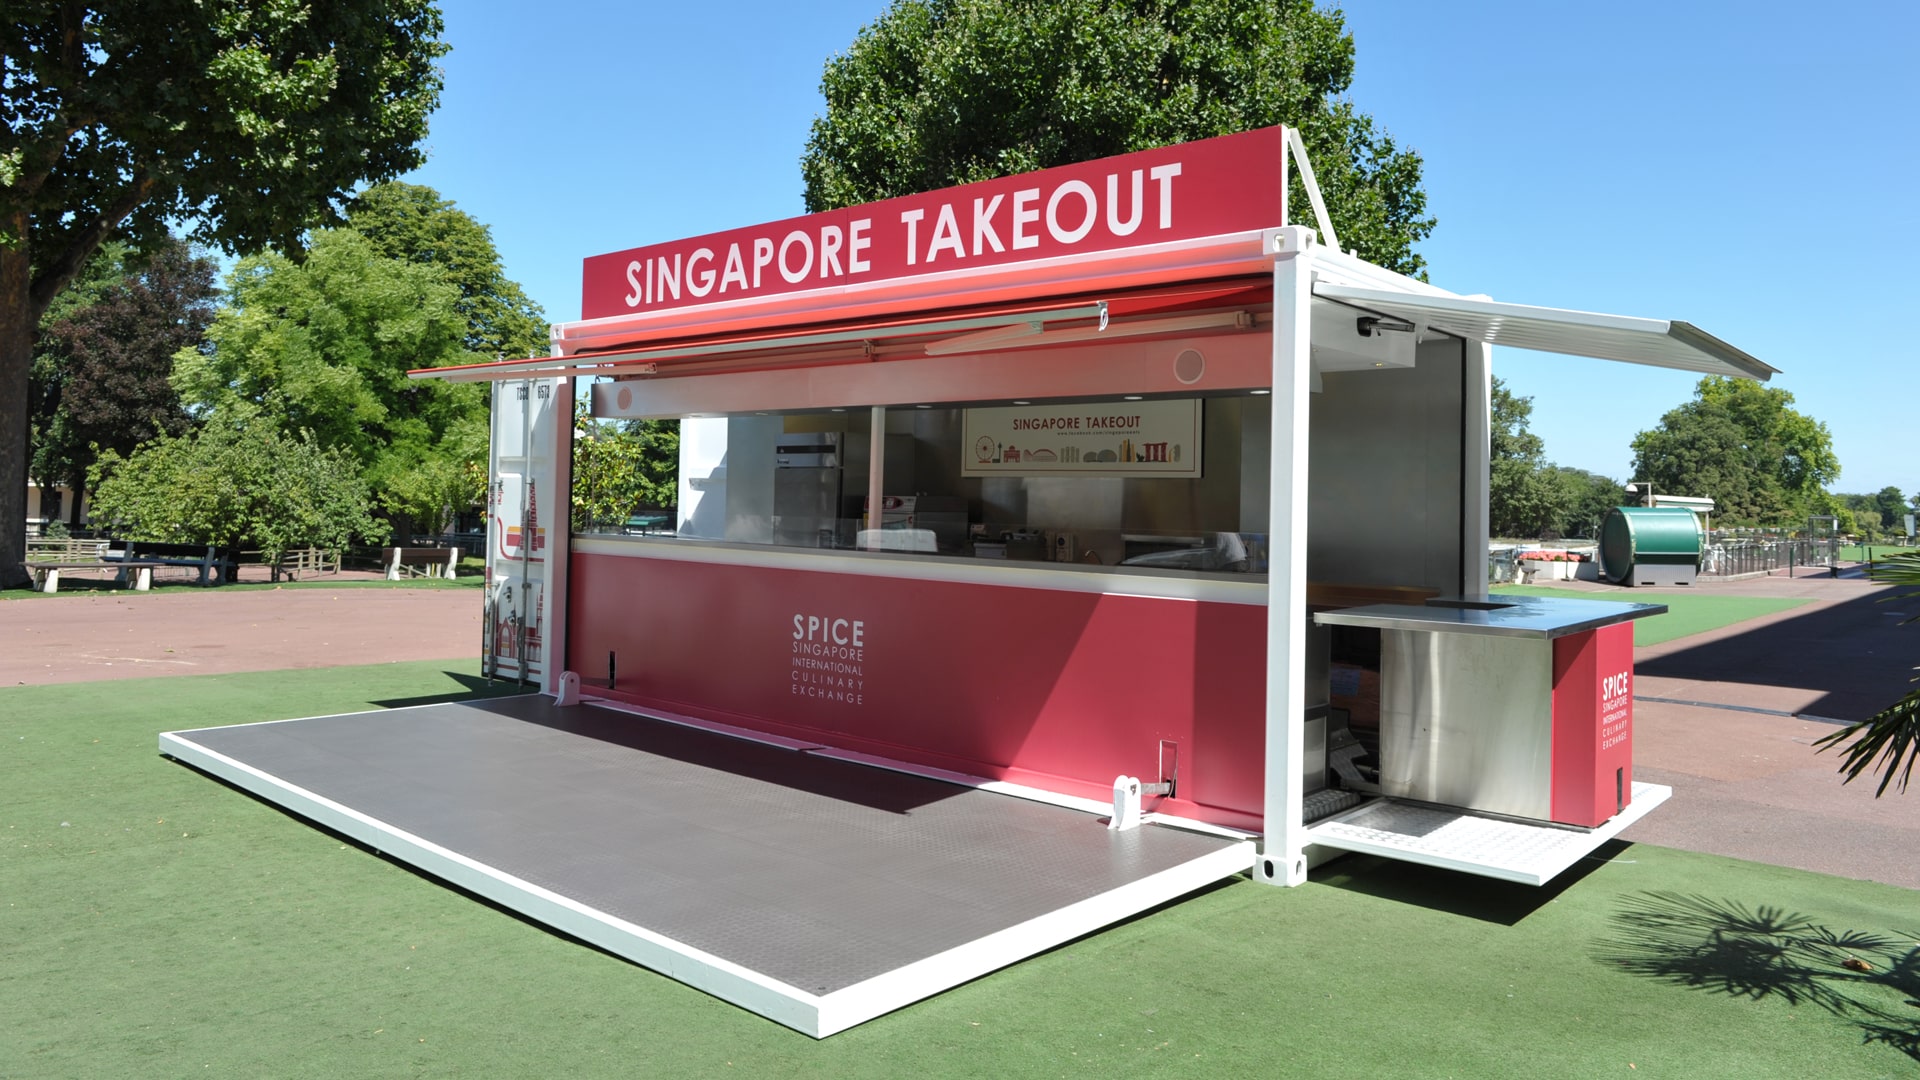 tsc_opt-images_customized-containers_singapore-takeout-paris-1920x1080-01-min